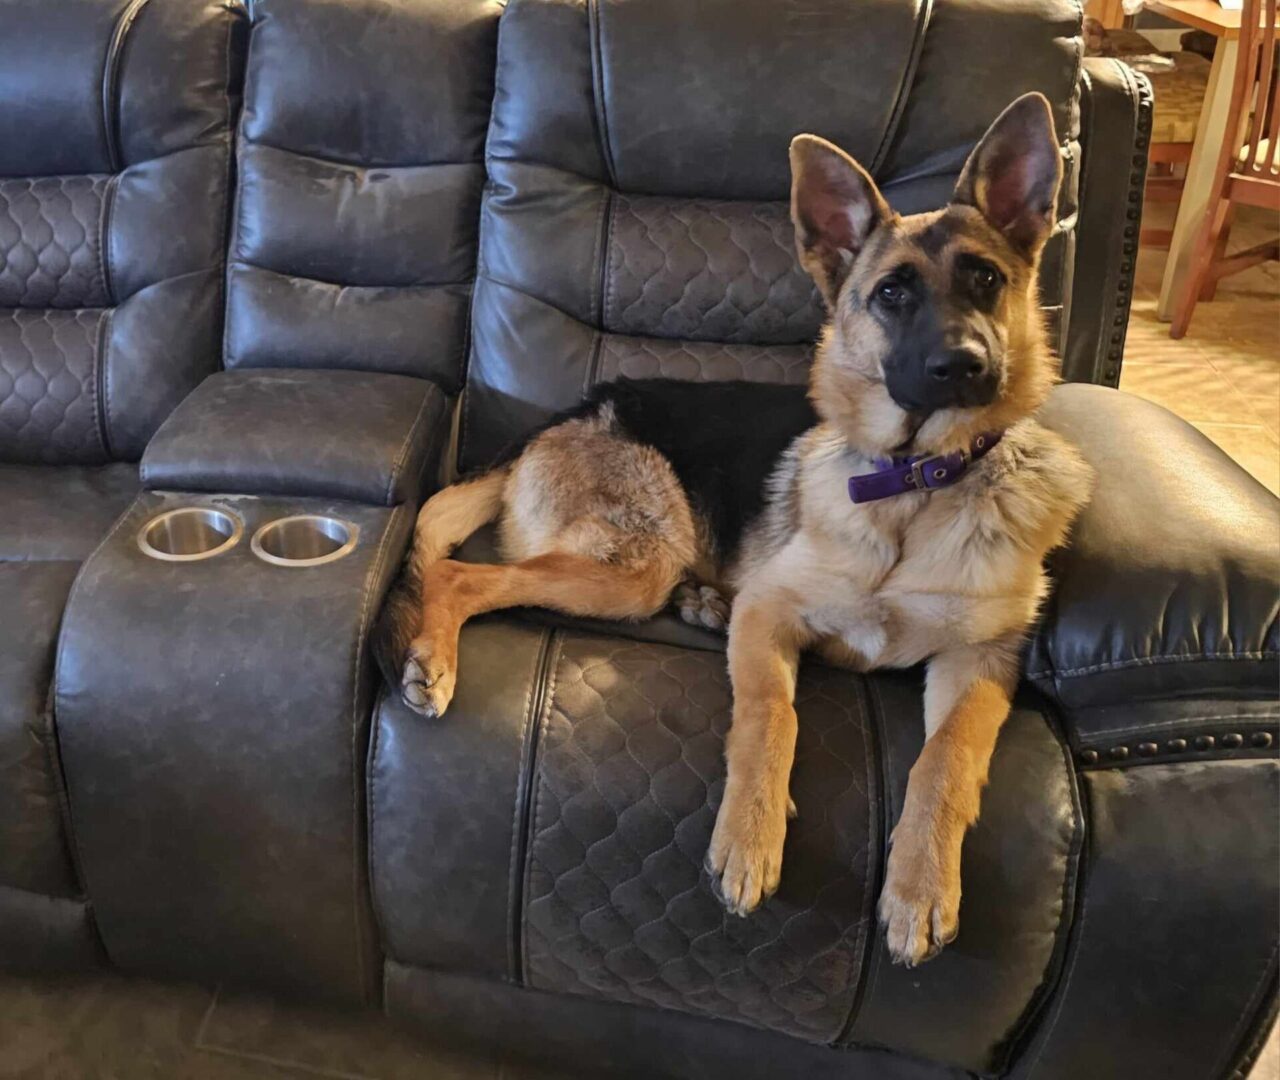 A dog laying on the couch with another dog